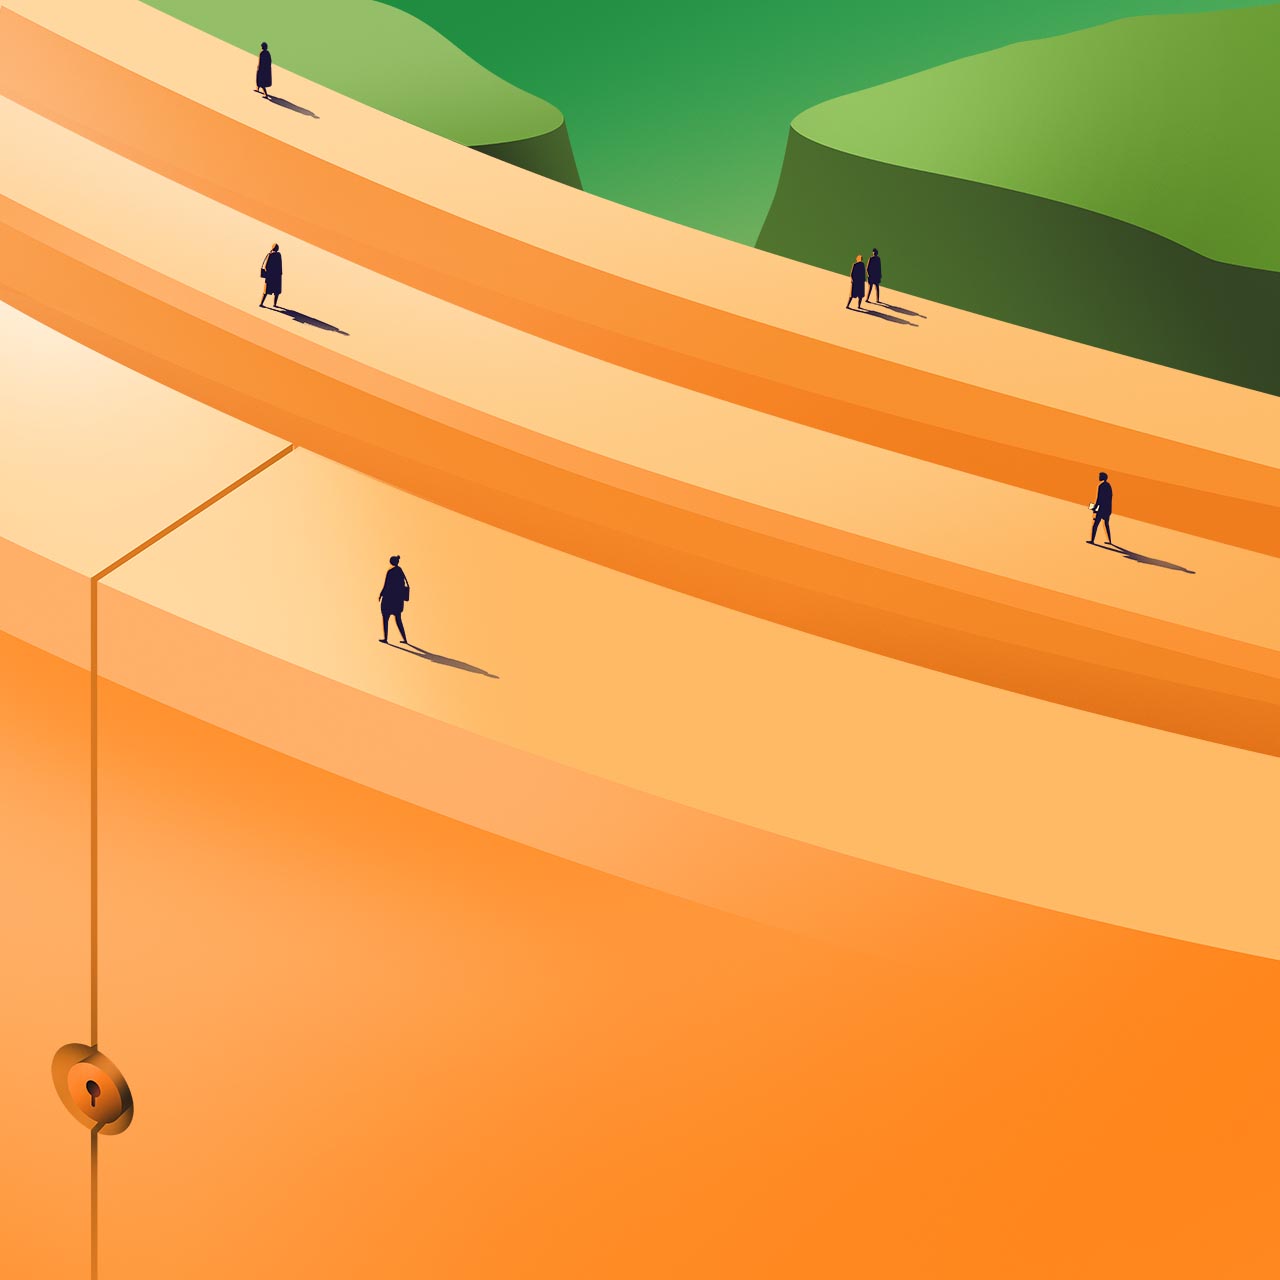 An illustration of people walking in different direction on a structure with a lock.